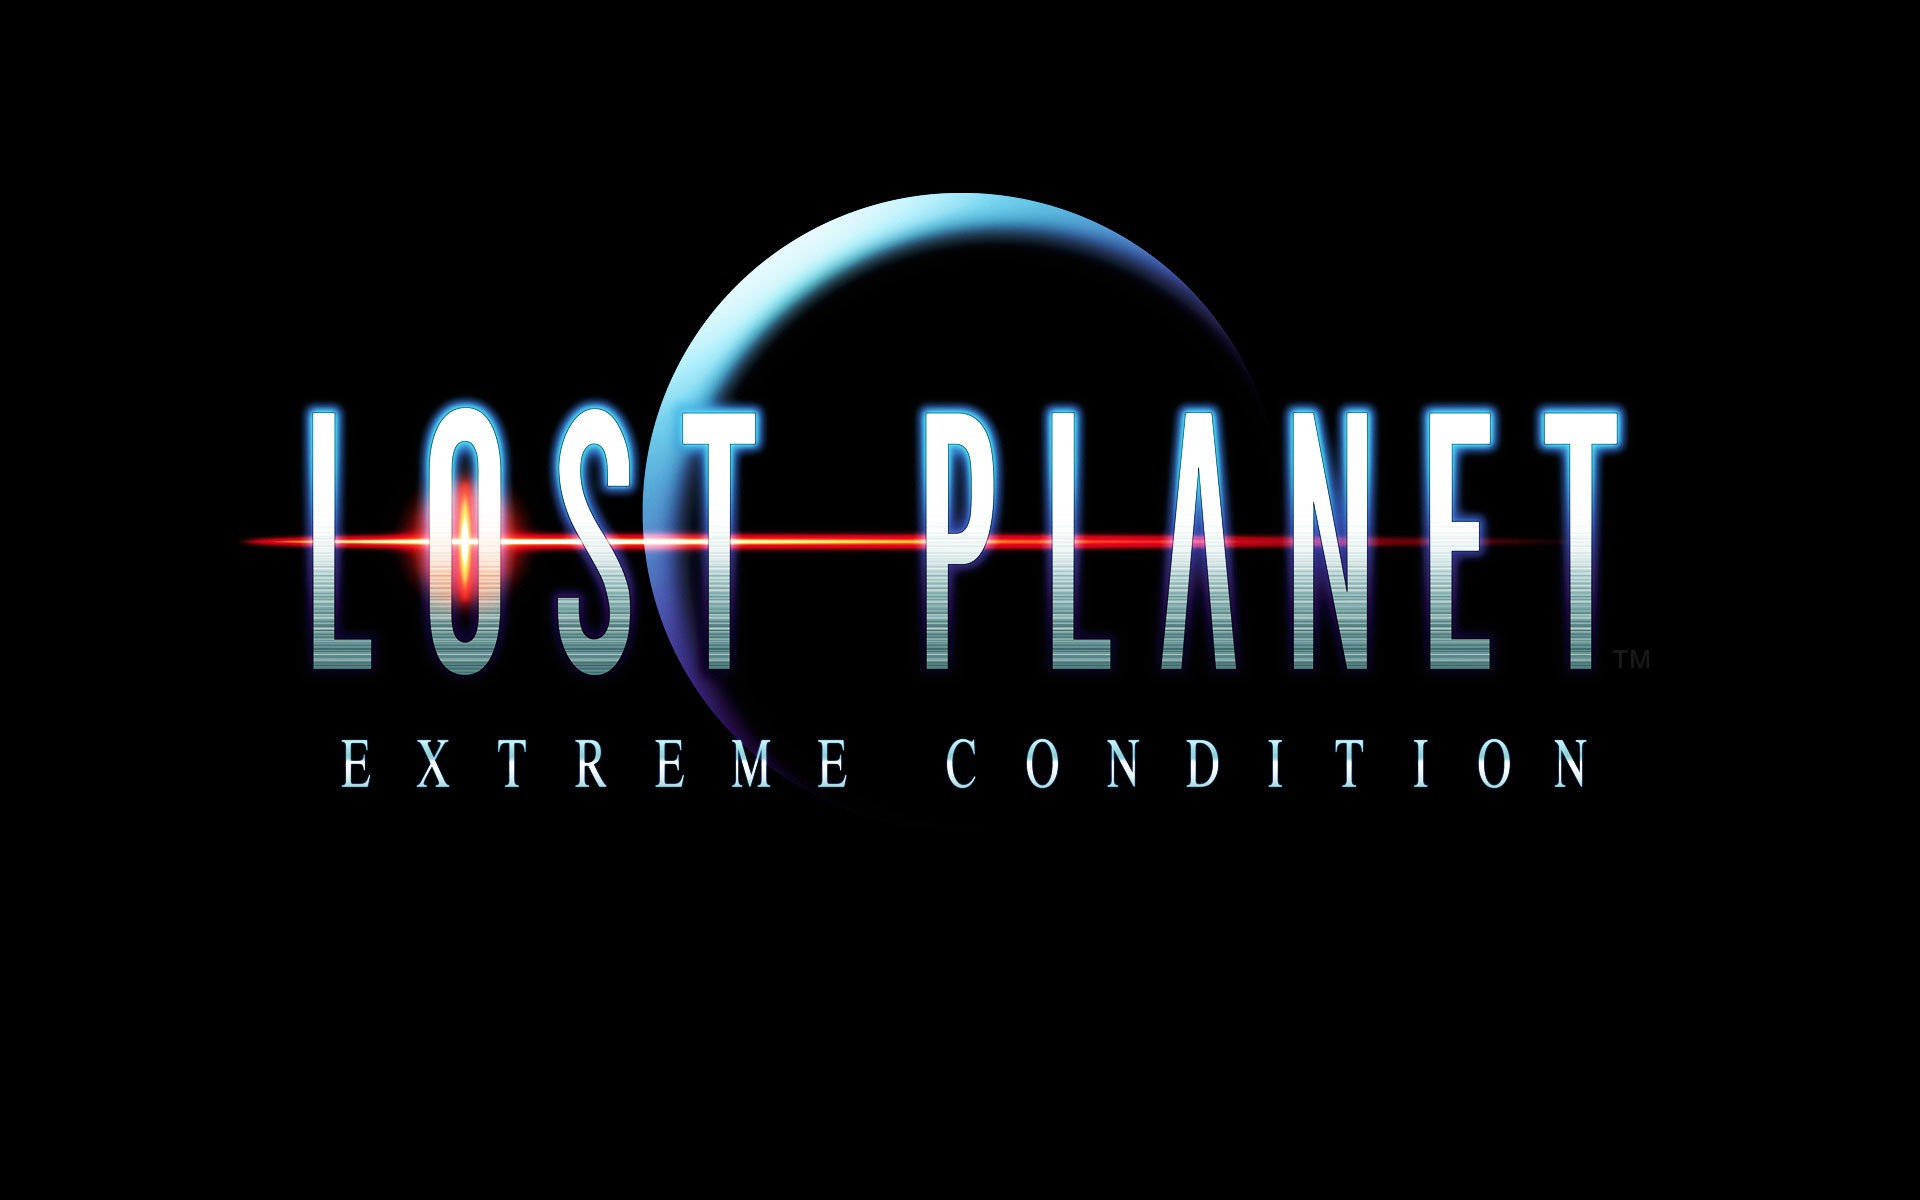 Lost Planet: Extreme Condition HD tapety na plochu #14 - 1920x1200